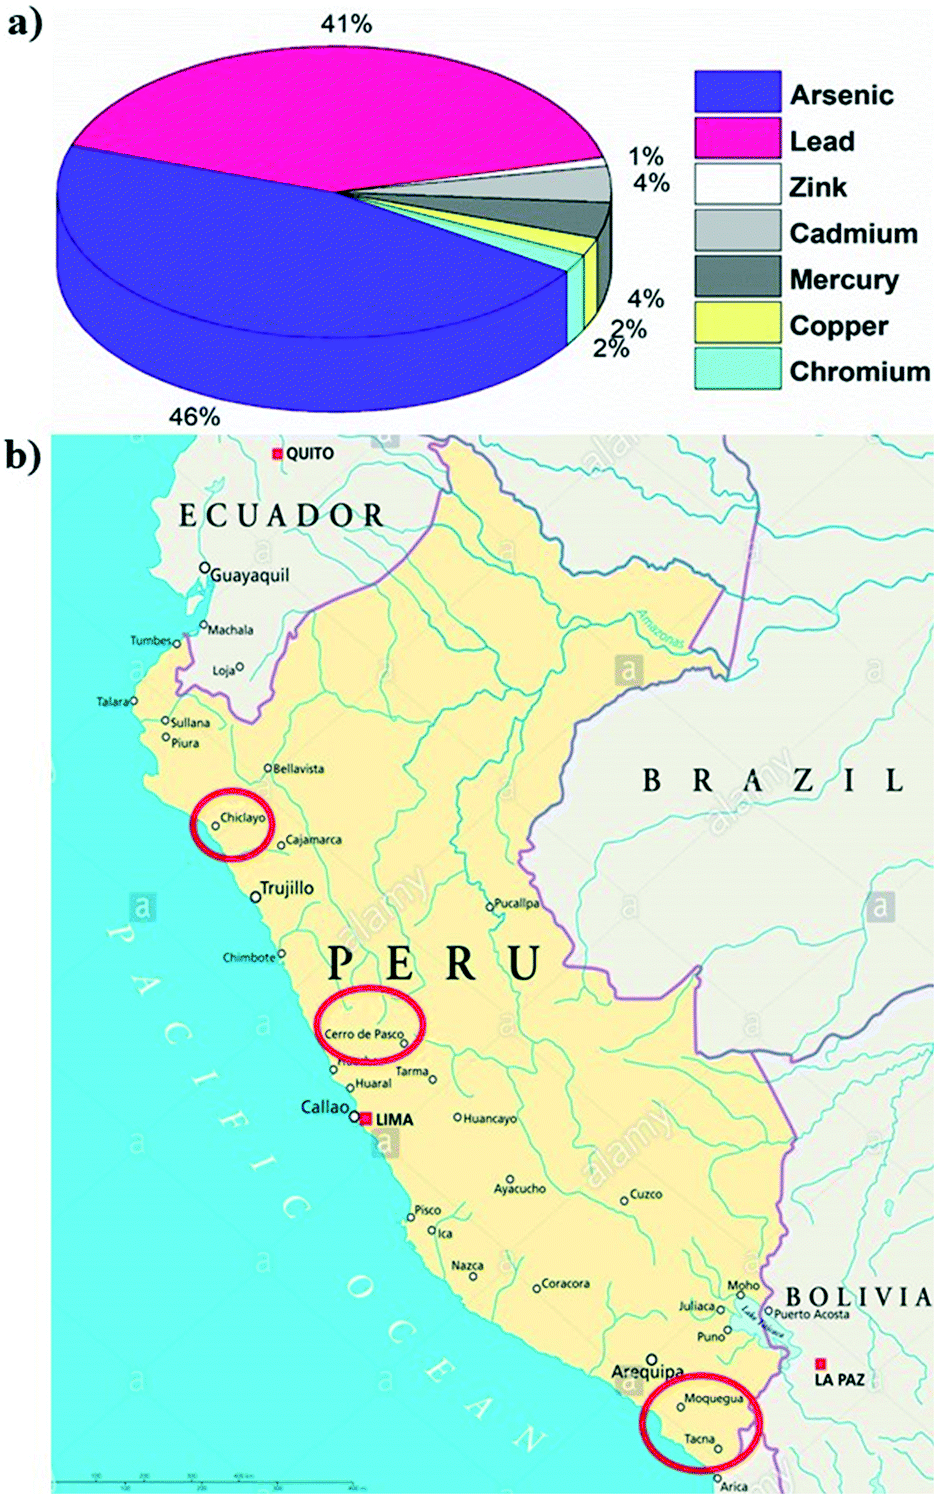 Arsenic removal from Peruvian drinking water using milk protein  nanofibril–carbon filters: a field study - Environmental Science: Water  Research & Technology (RSC Publishing) DOI:10.1039/D1EW00456E